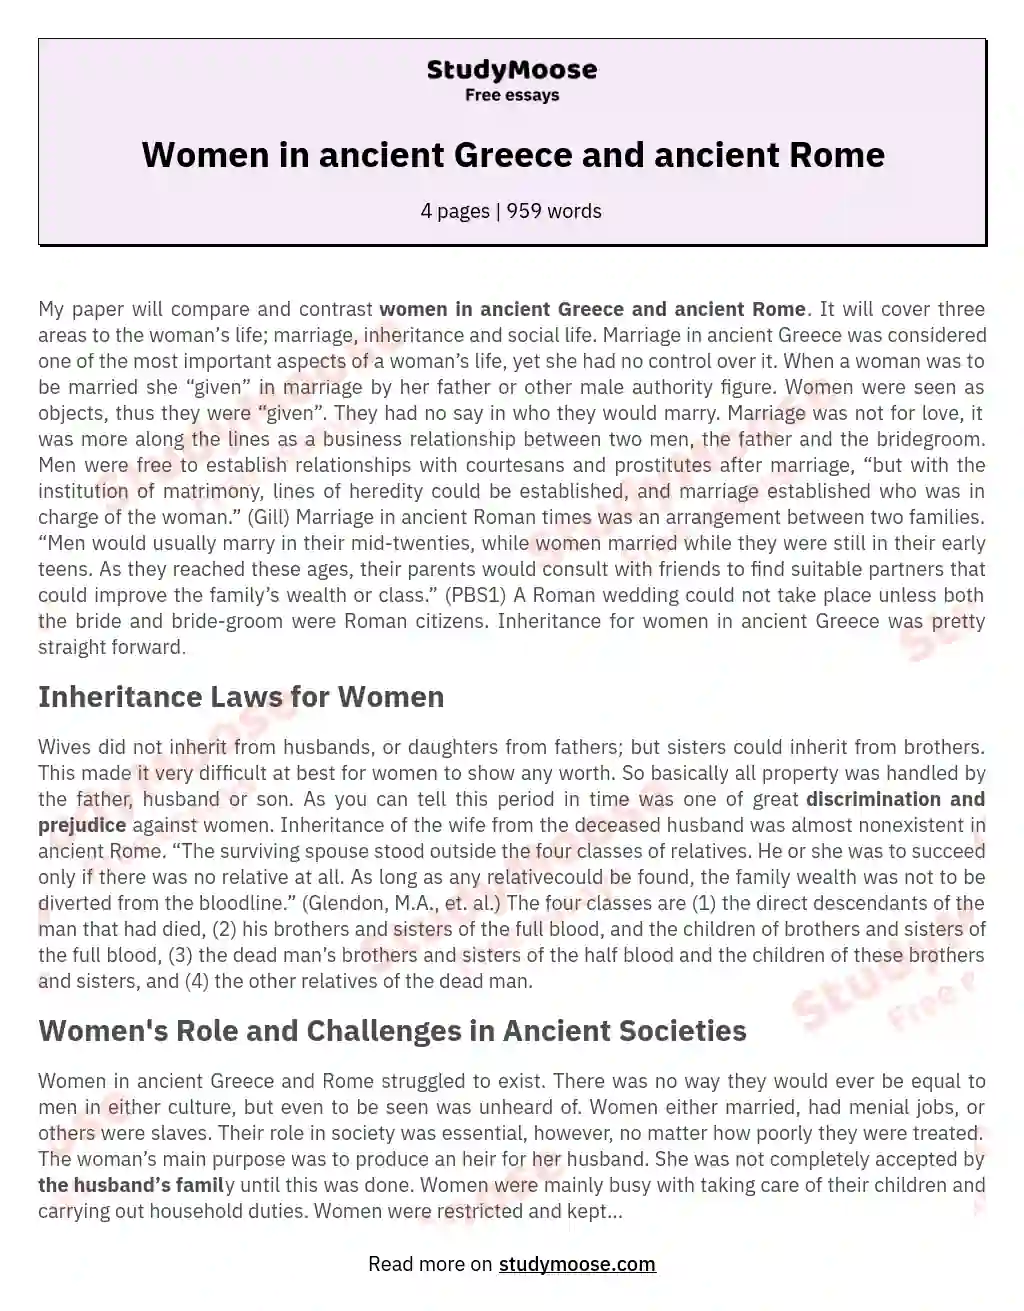 Women in ancient Greece and ancient Rome essay